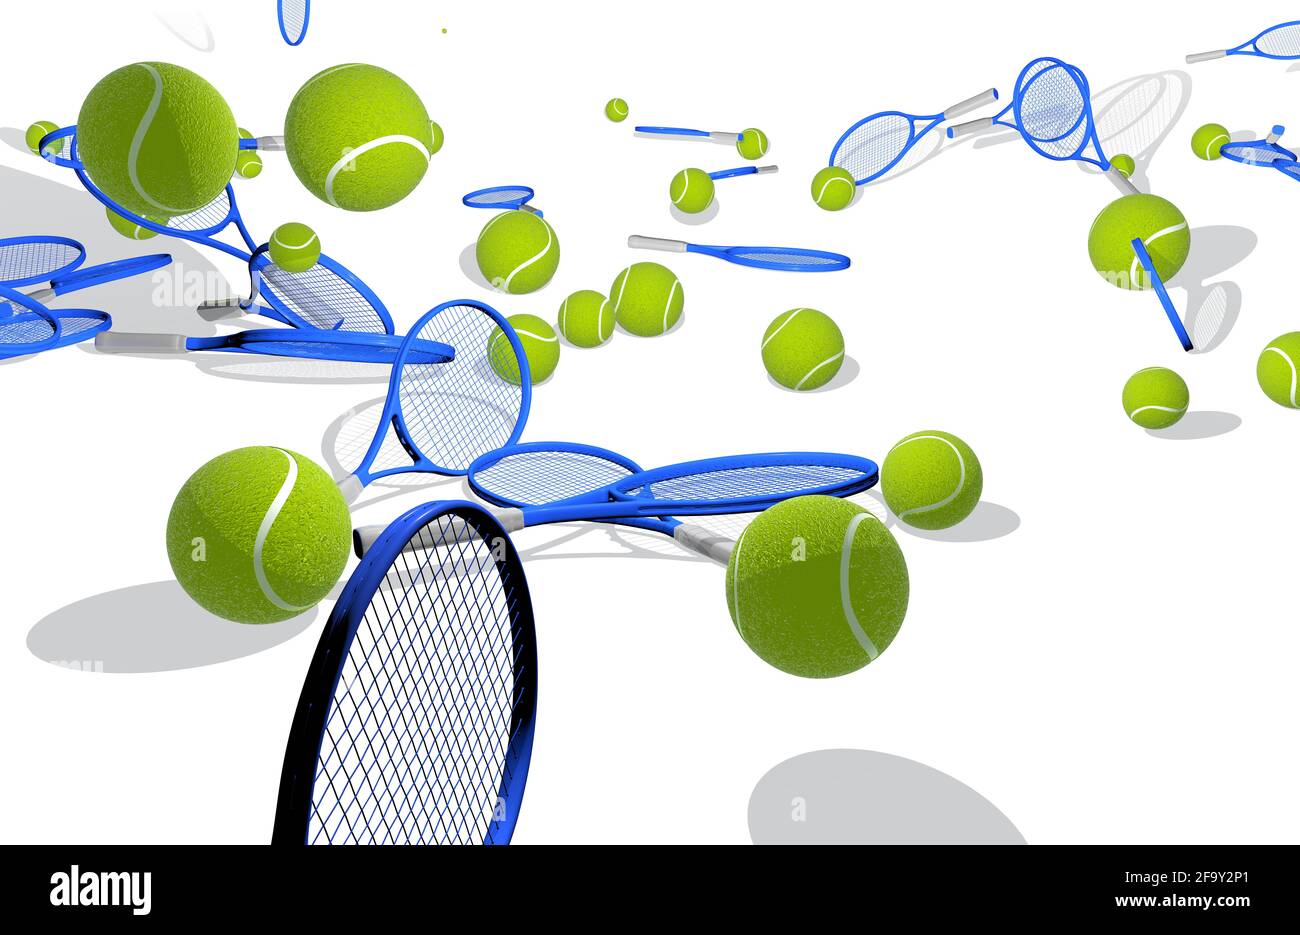 3d illustration of tennis balls and rackets. Falling to the ground bouncing and mingling. Cut out on white background with bold colors. Stock Photo